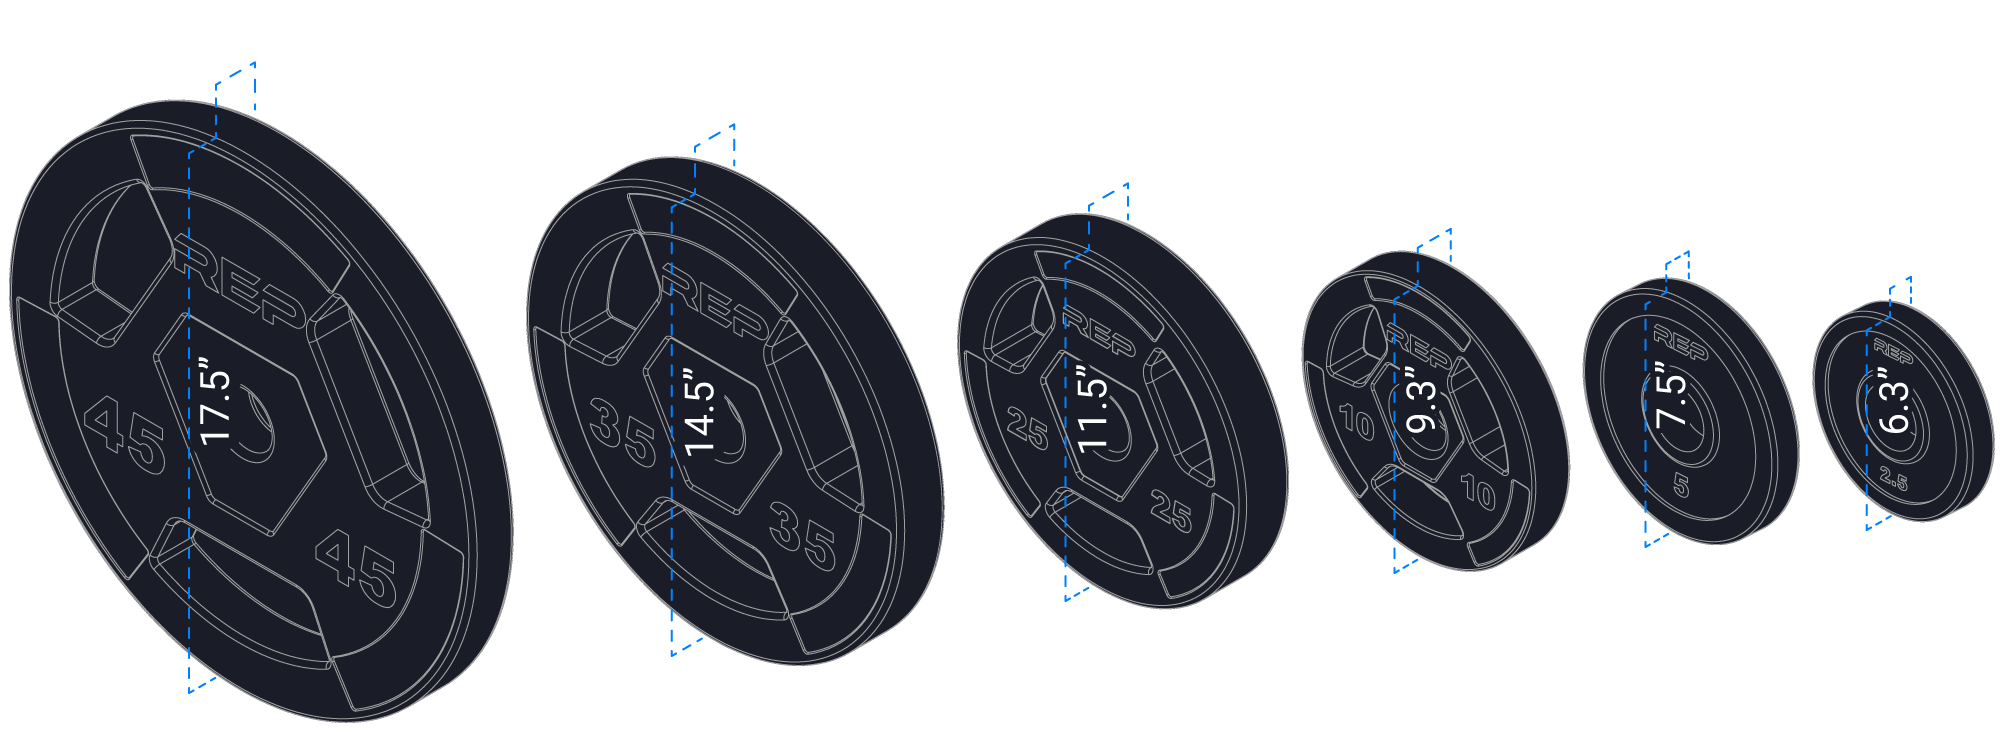 Rubber Coated Olympic Plates Informational